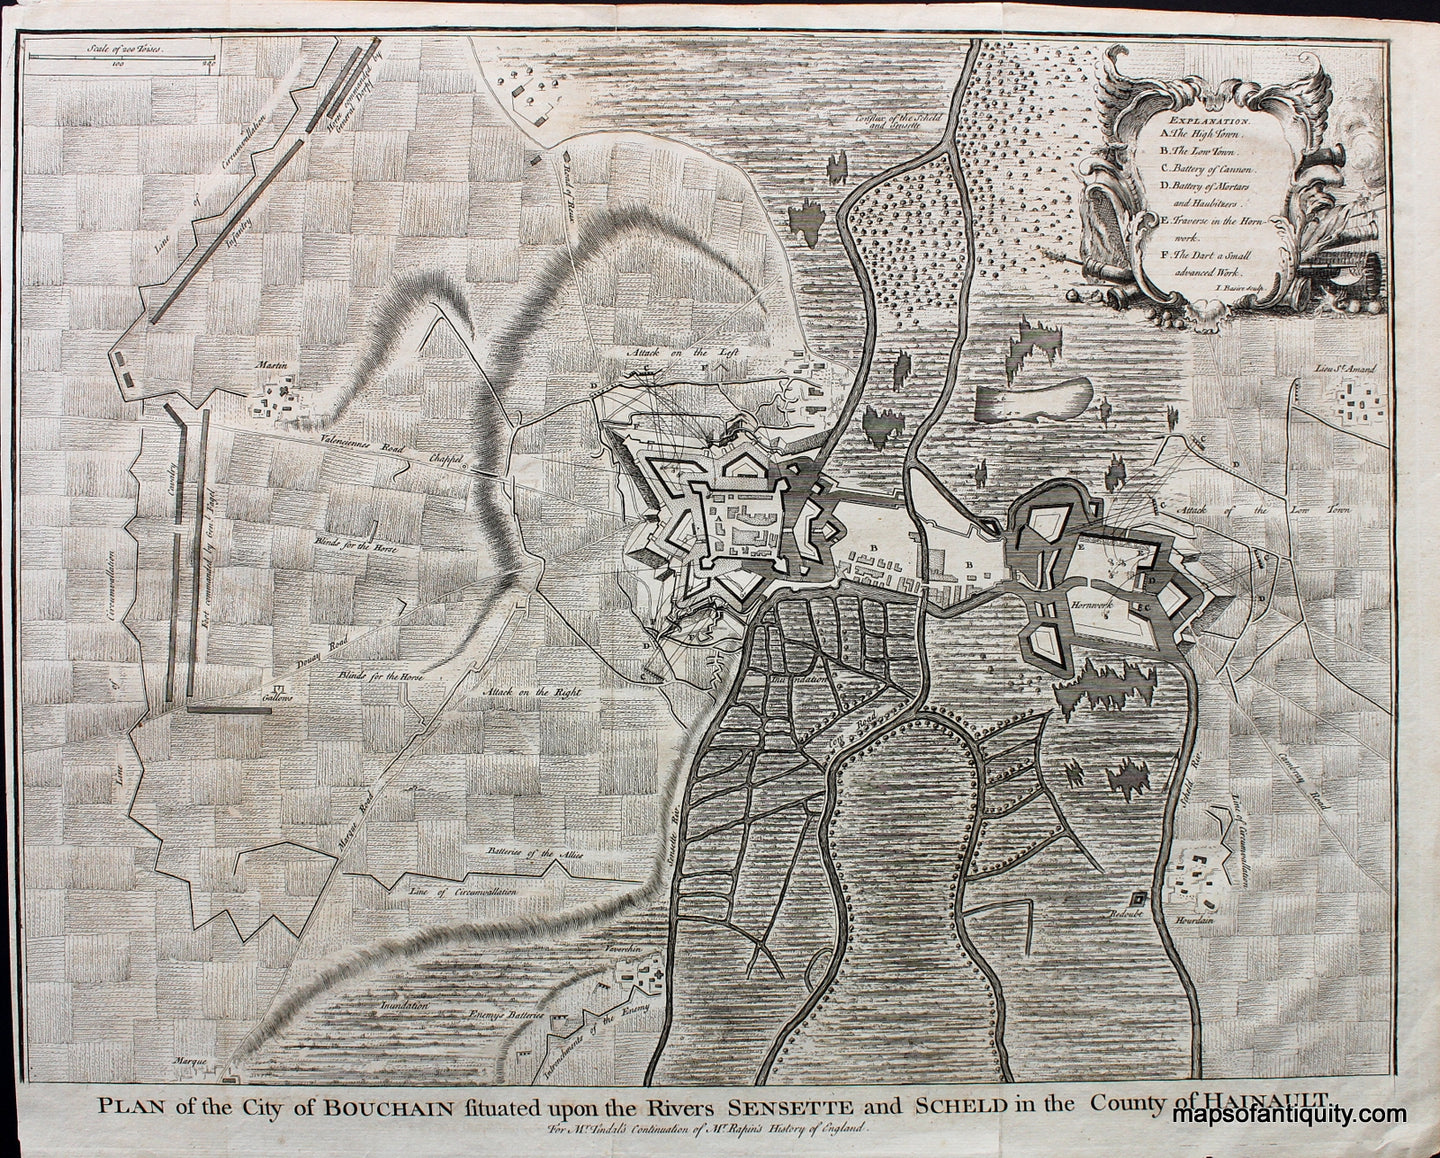 Black-and-White-Engraved-Antique-Map-Plan-of-the-City-of-Bouchain-situated-upon-the-Rivers-Sensette-and-Scheld-in-the-County-of-Hainault.-Europe-France-1745-Rapin-Maps-Of-Antiquity